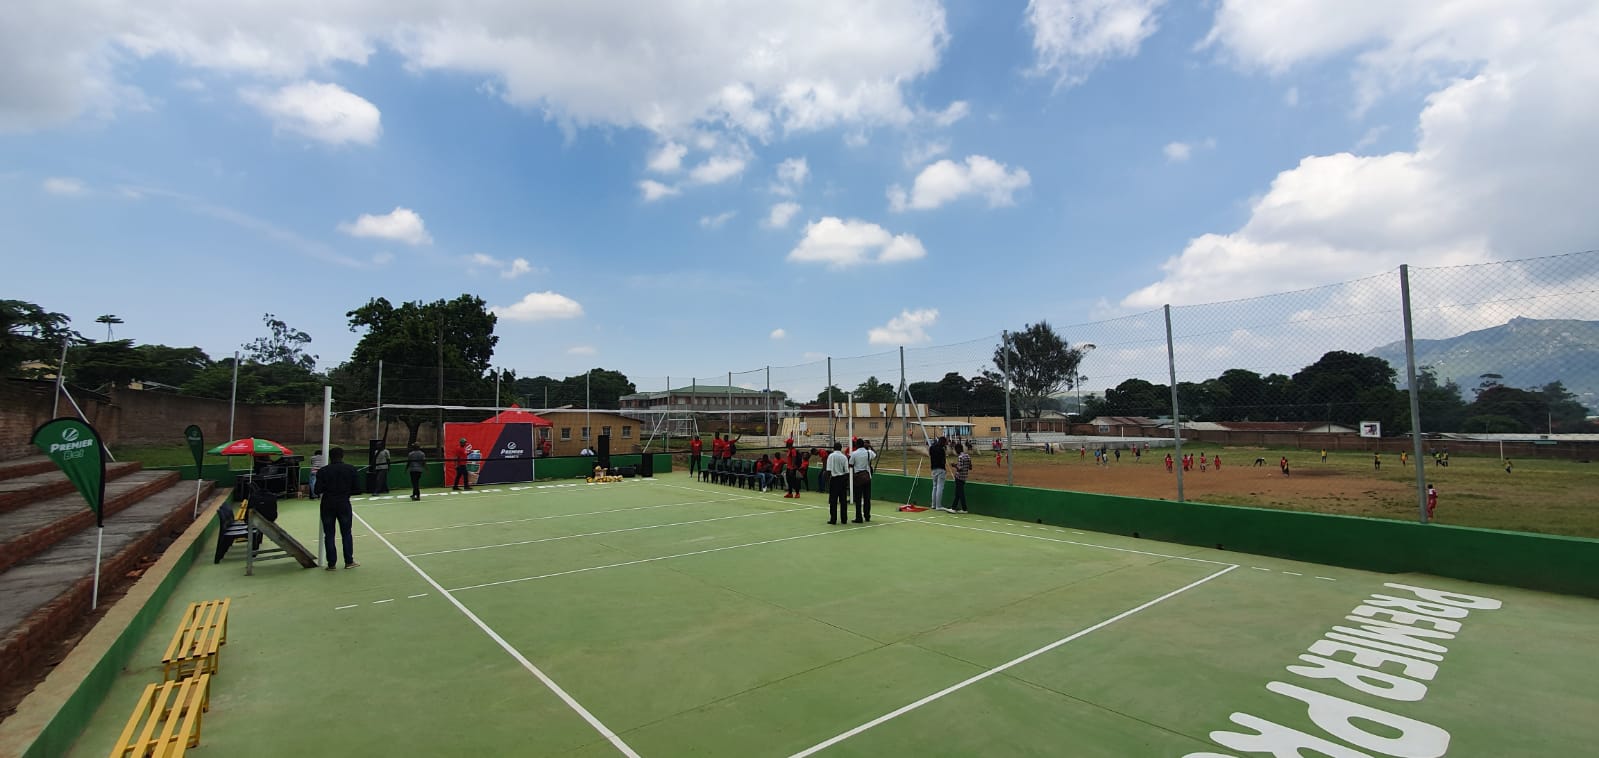 Volleyball court in Blantyre renovated